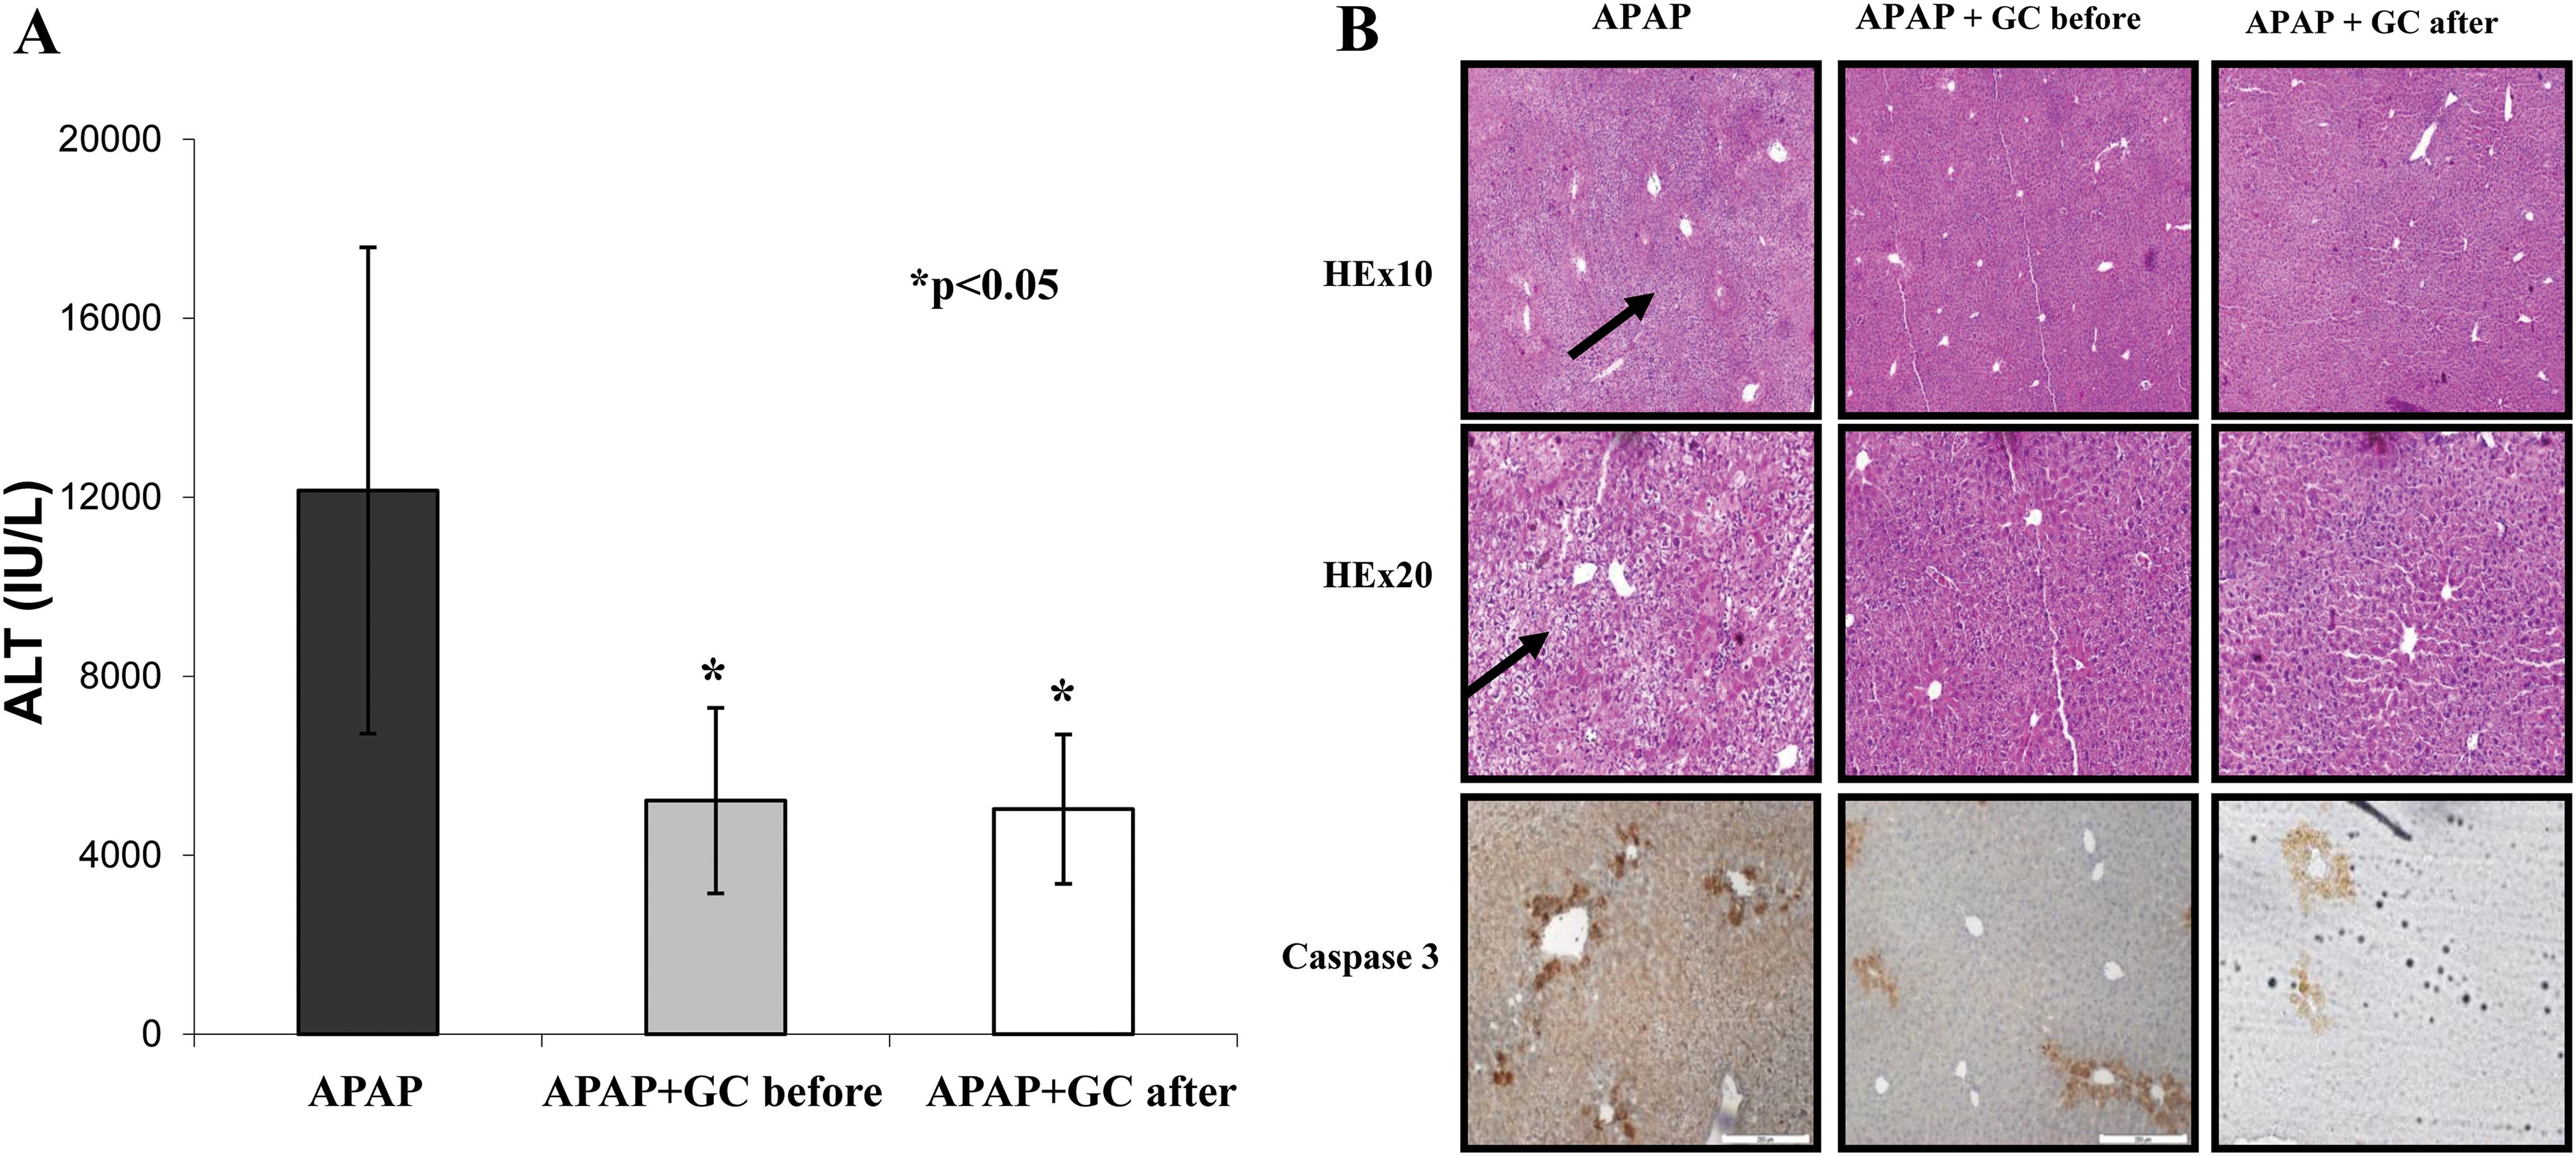 Protective effect of β-glucosylceramide from APAP-mediated liver damage.